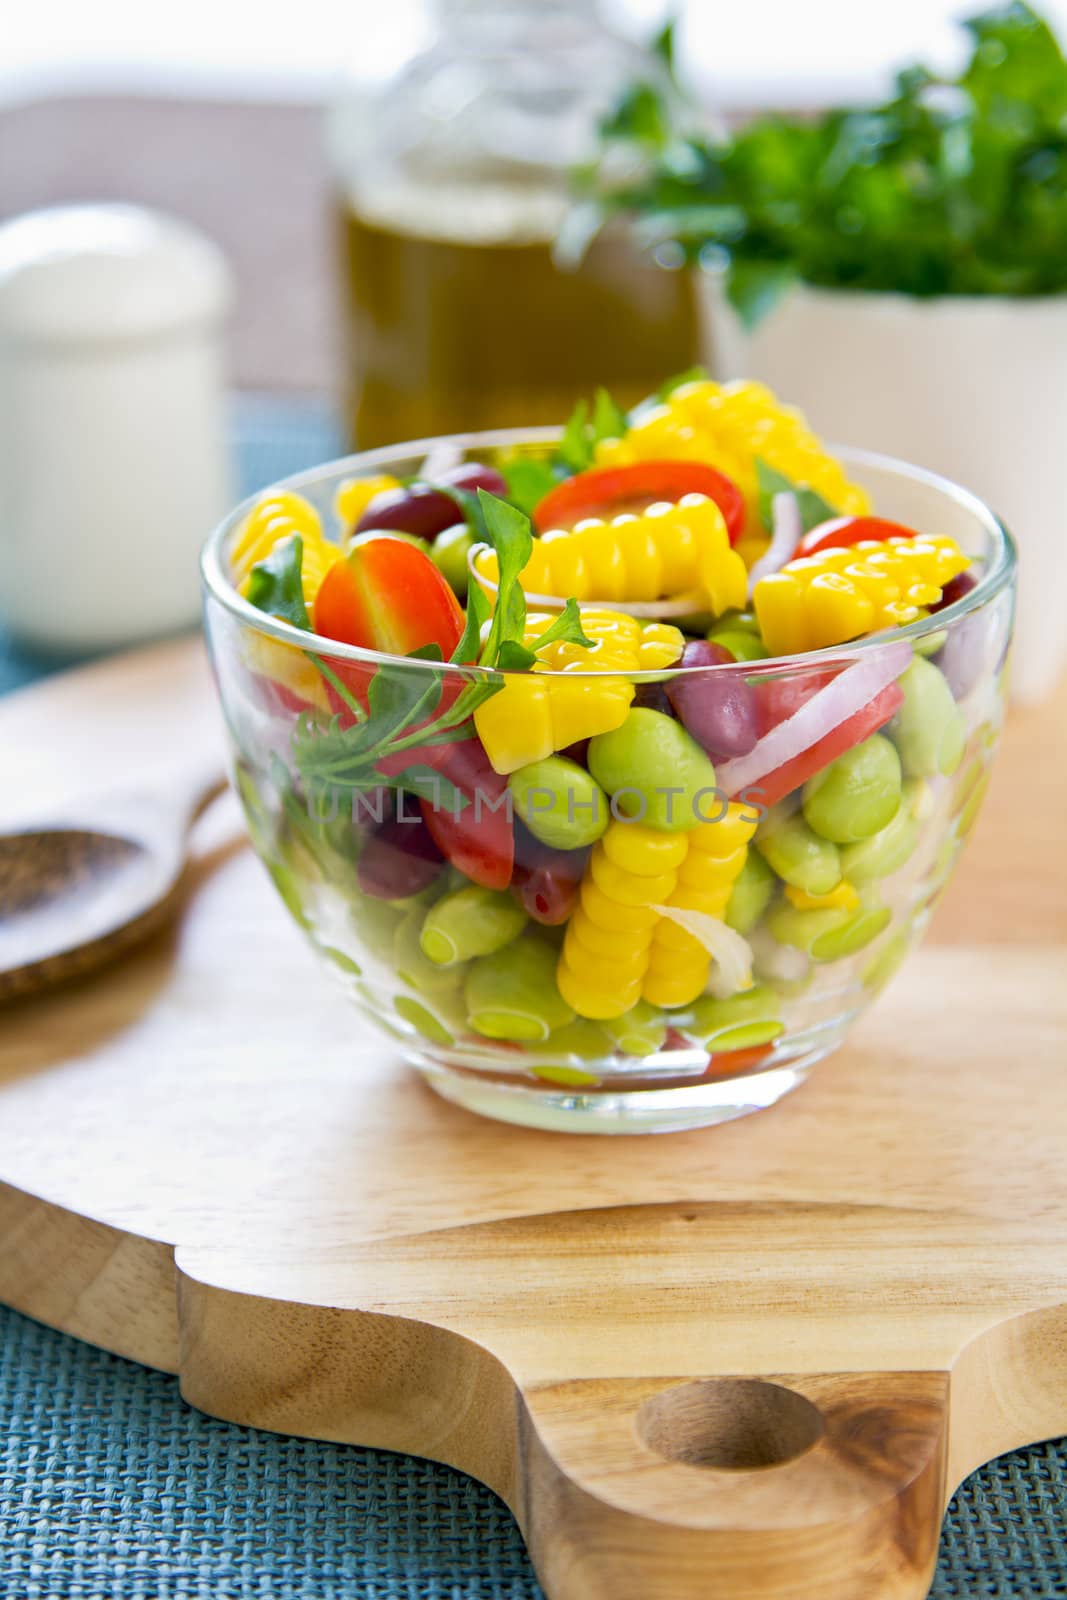 Beans and Corn salad by vanillaechoes